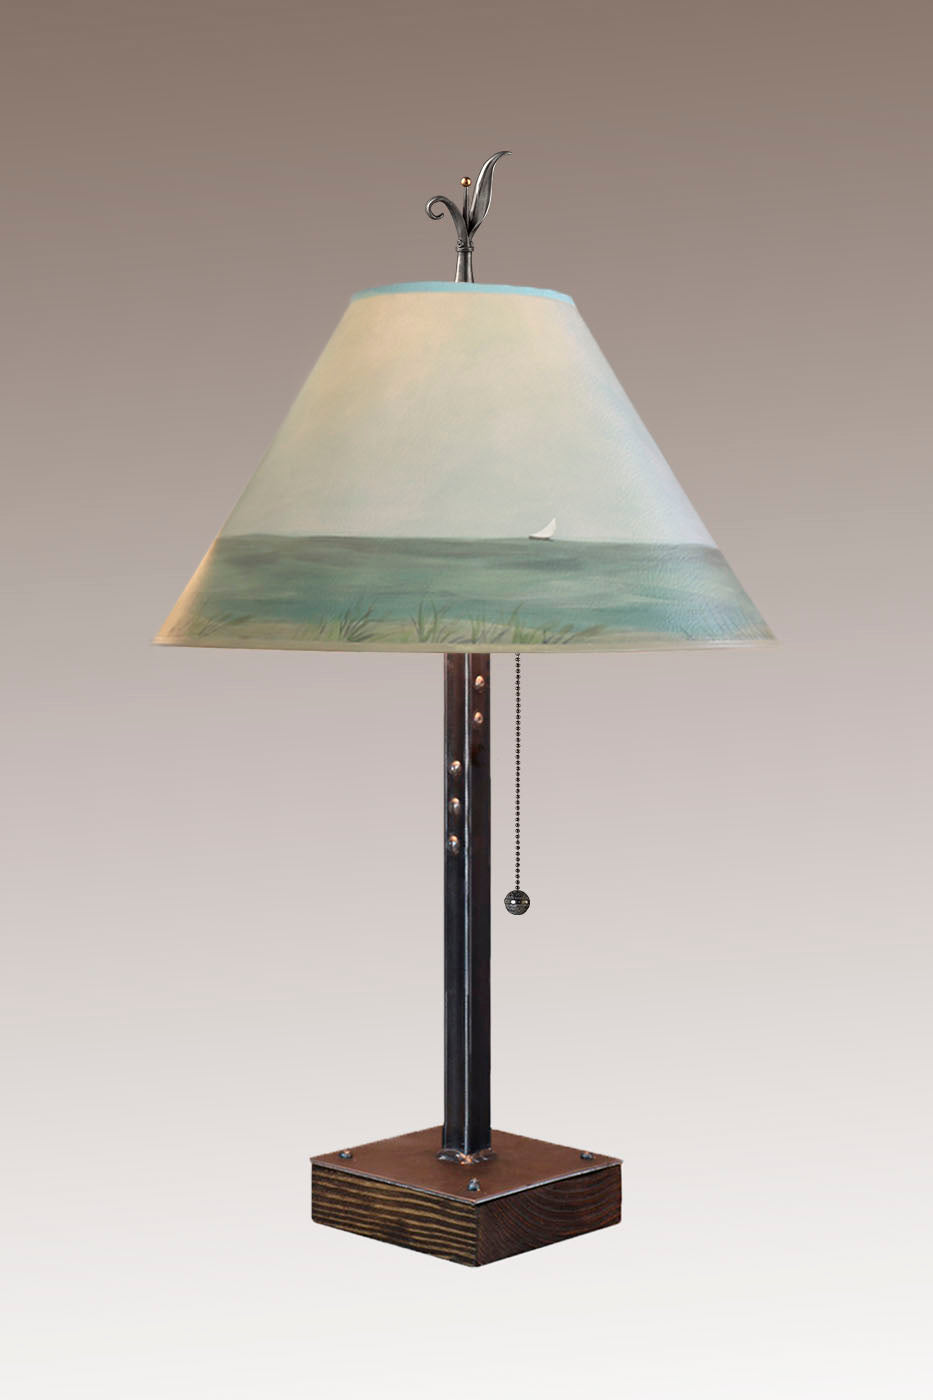 Steel Table Lamp on Wood with Medium Conical Shade in Shore